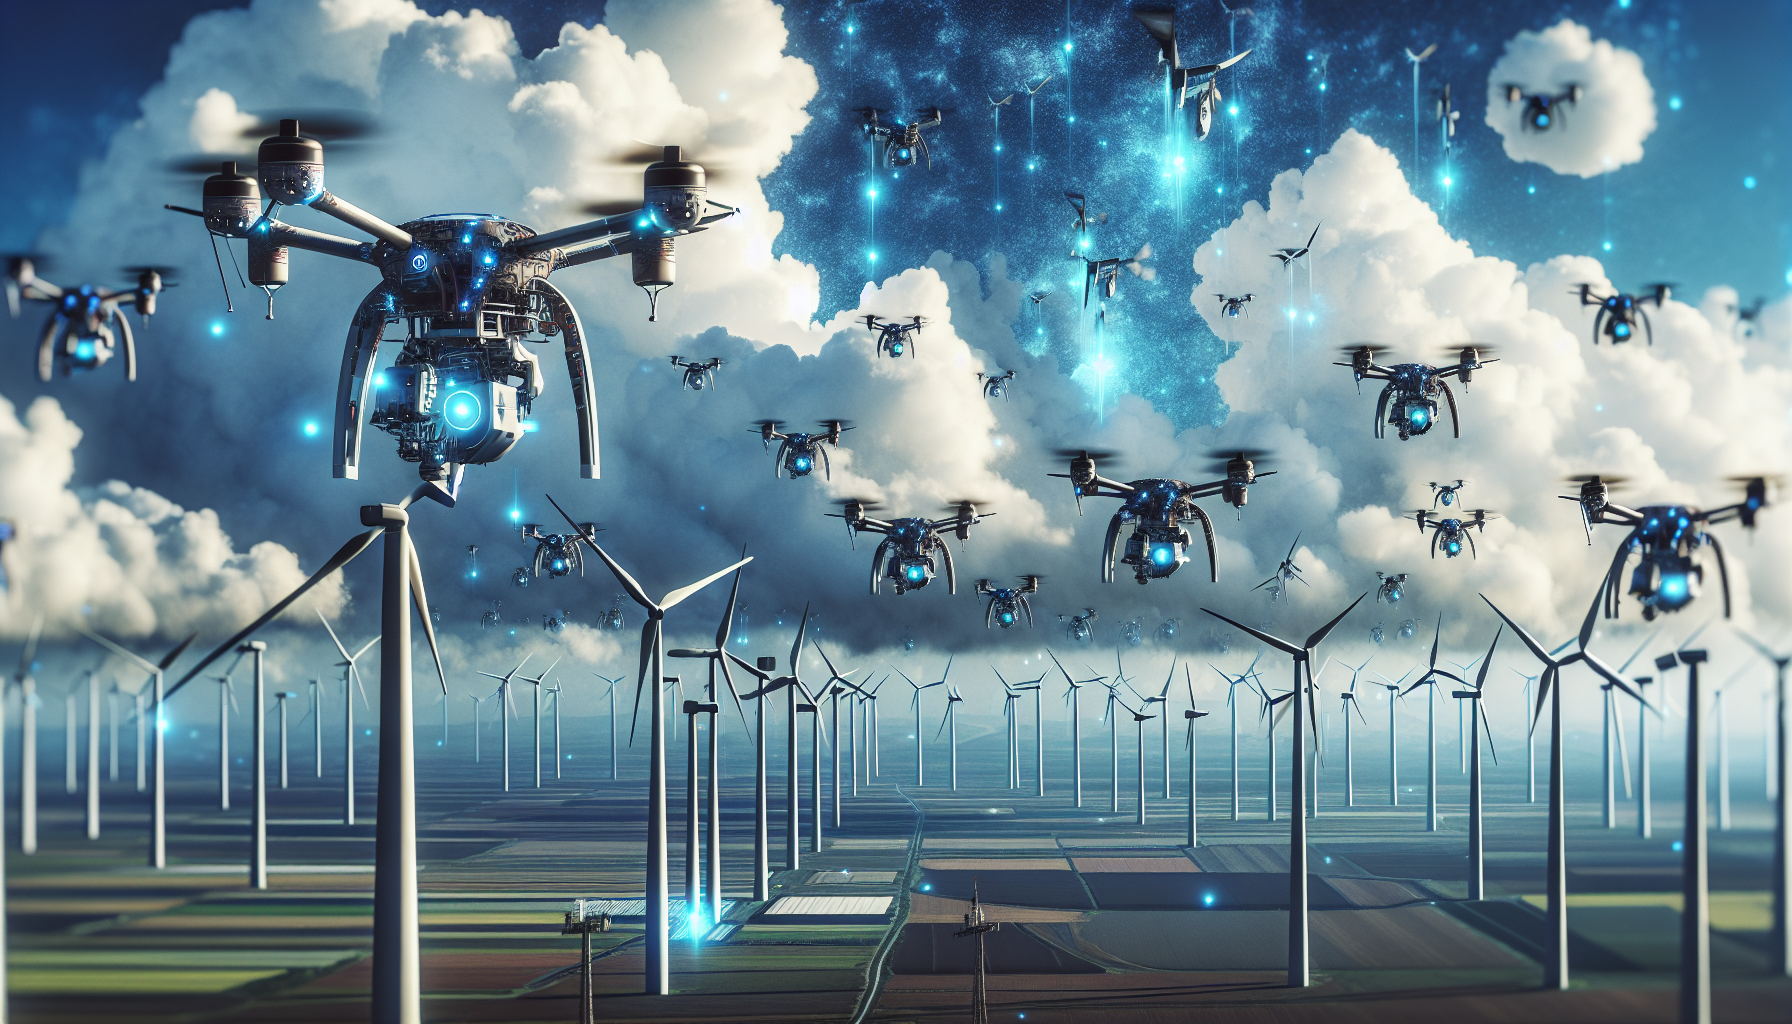 Drones equipped with monitoring sensors in wind farms